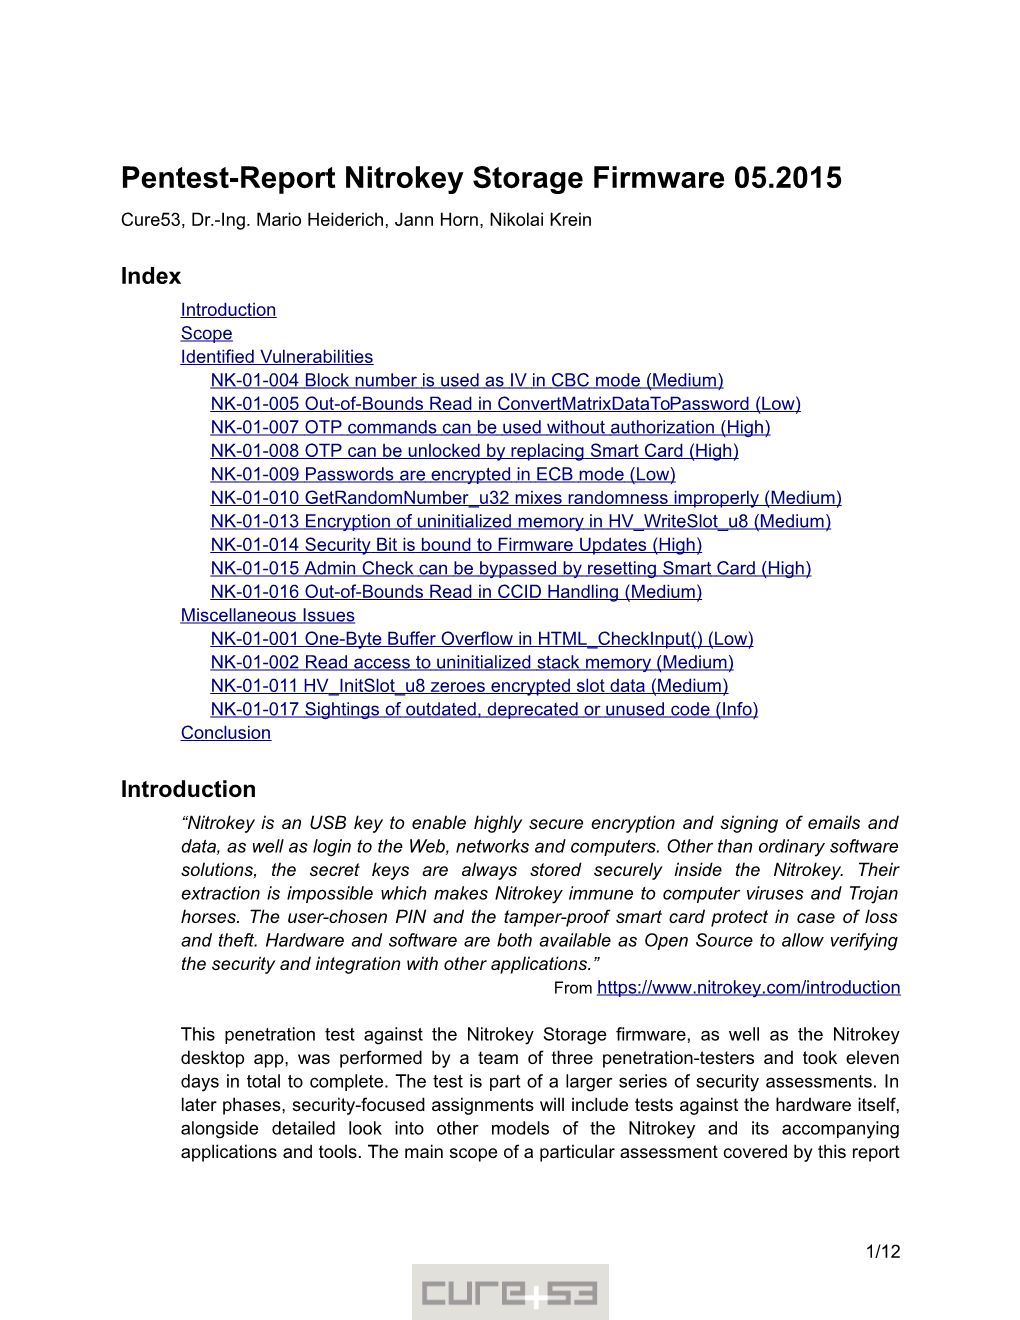 Pentest-Report Nitrokey Storage Firmware 05.2015 Cure53, Dr.-Ing